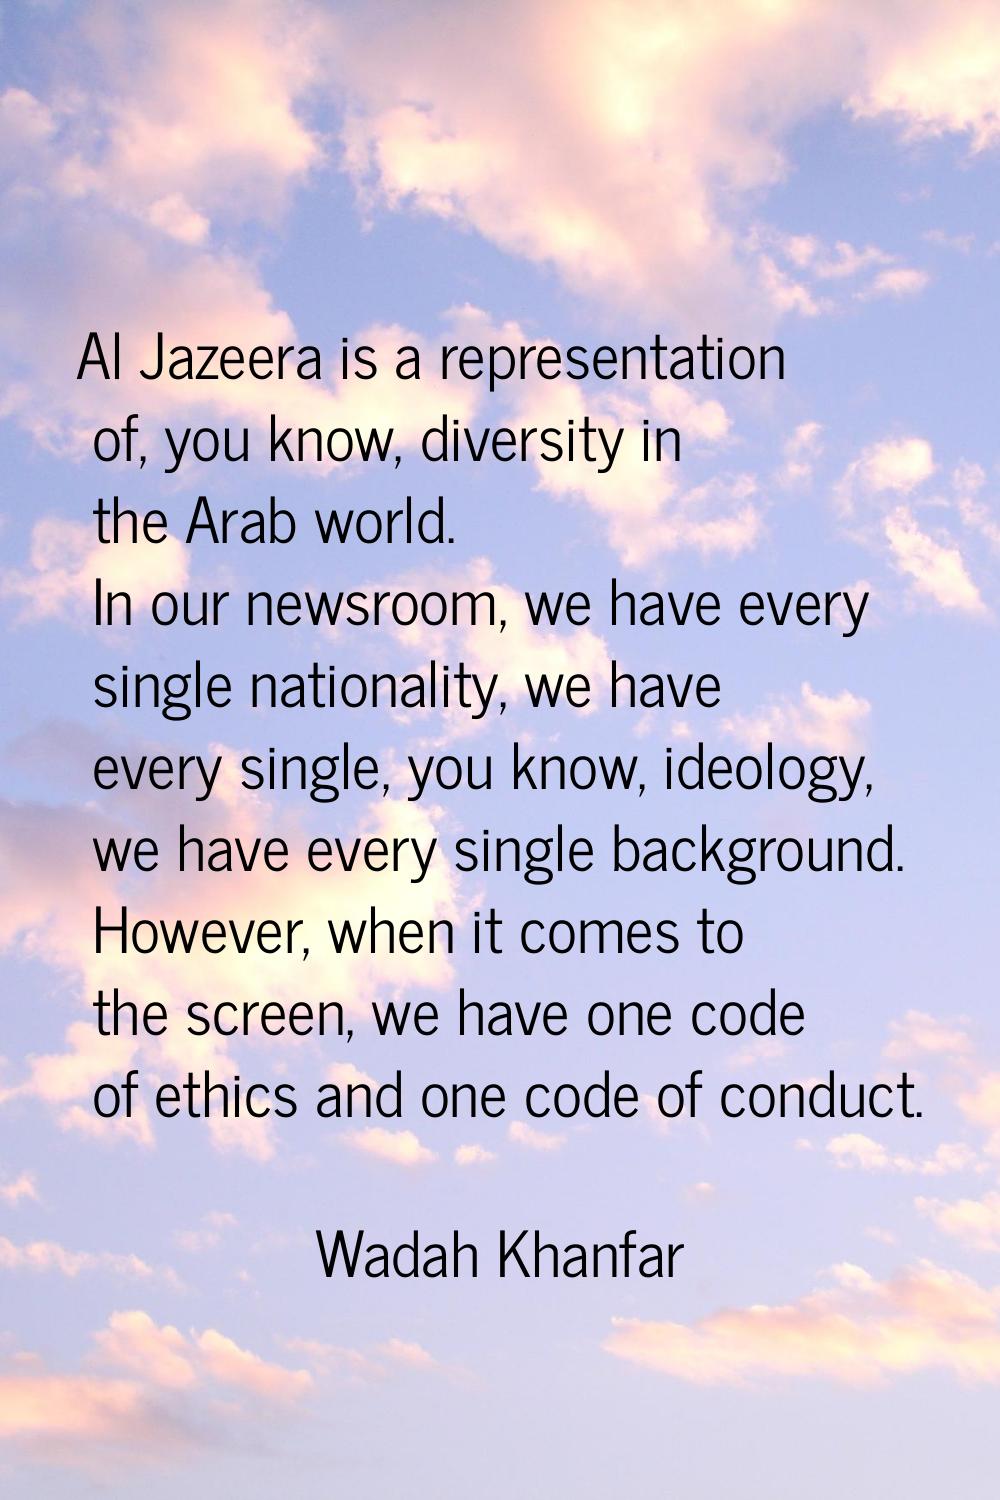 Al Jazeera is a representation of, you know, diversity in the Arab world. In our newsroom, we have 